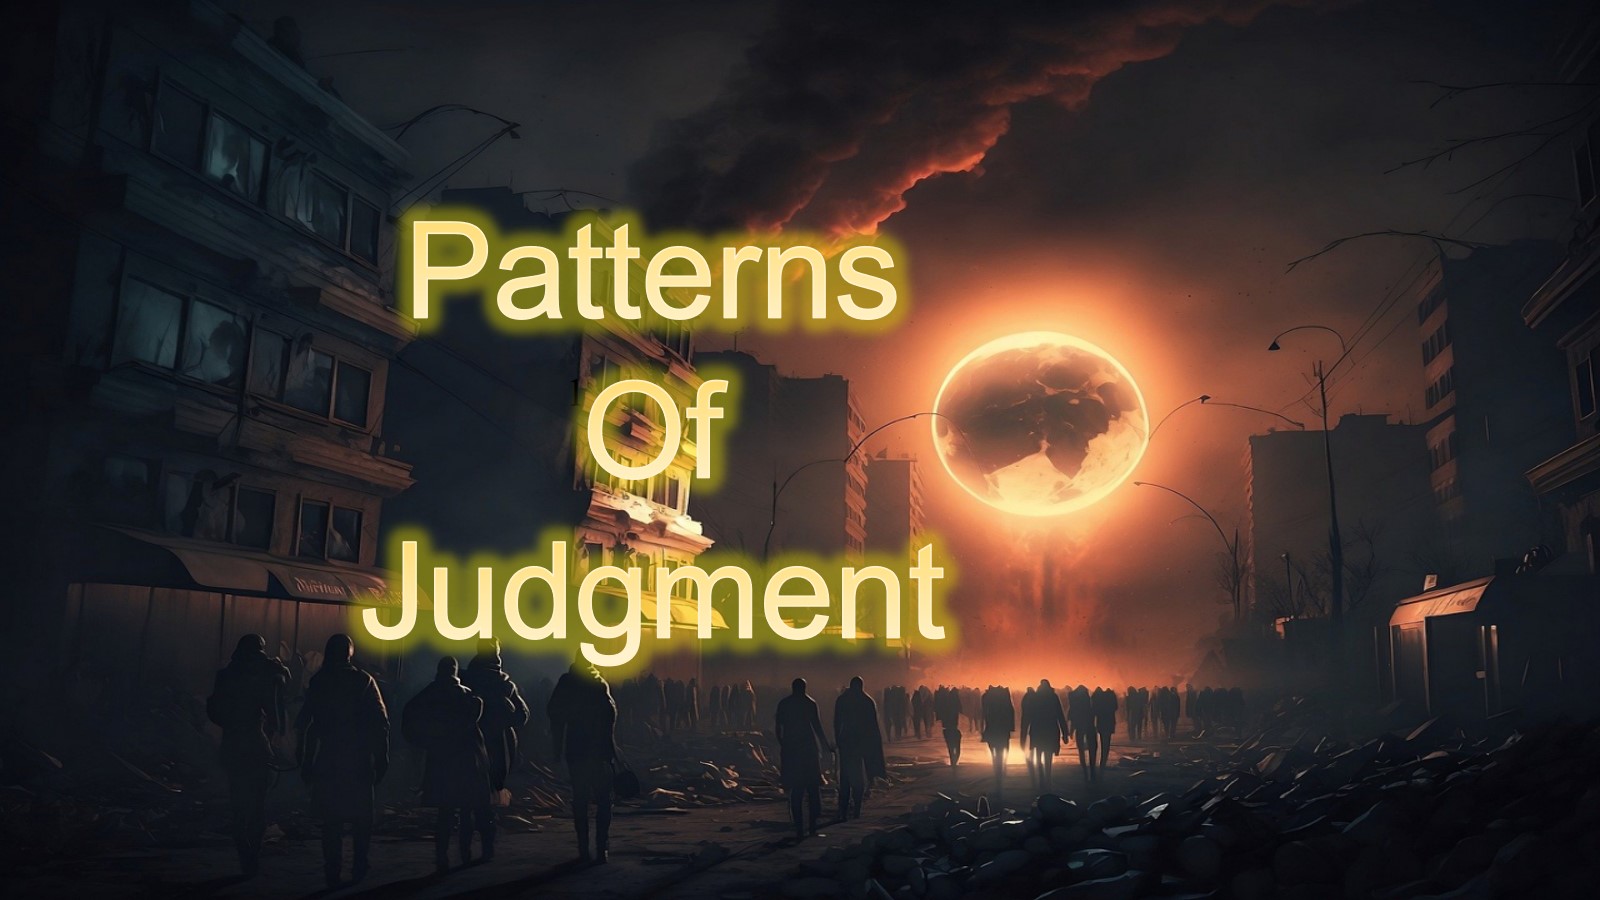 Patterns of Judgment